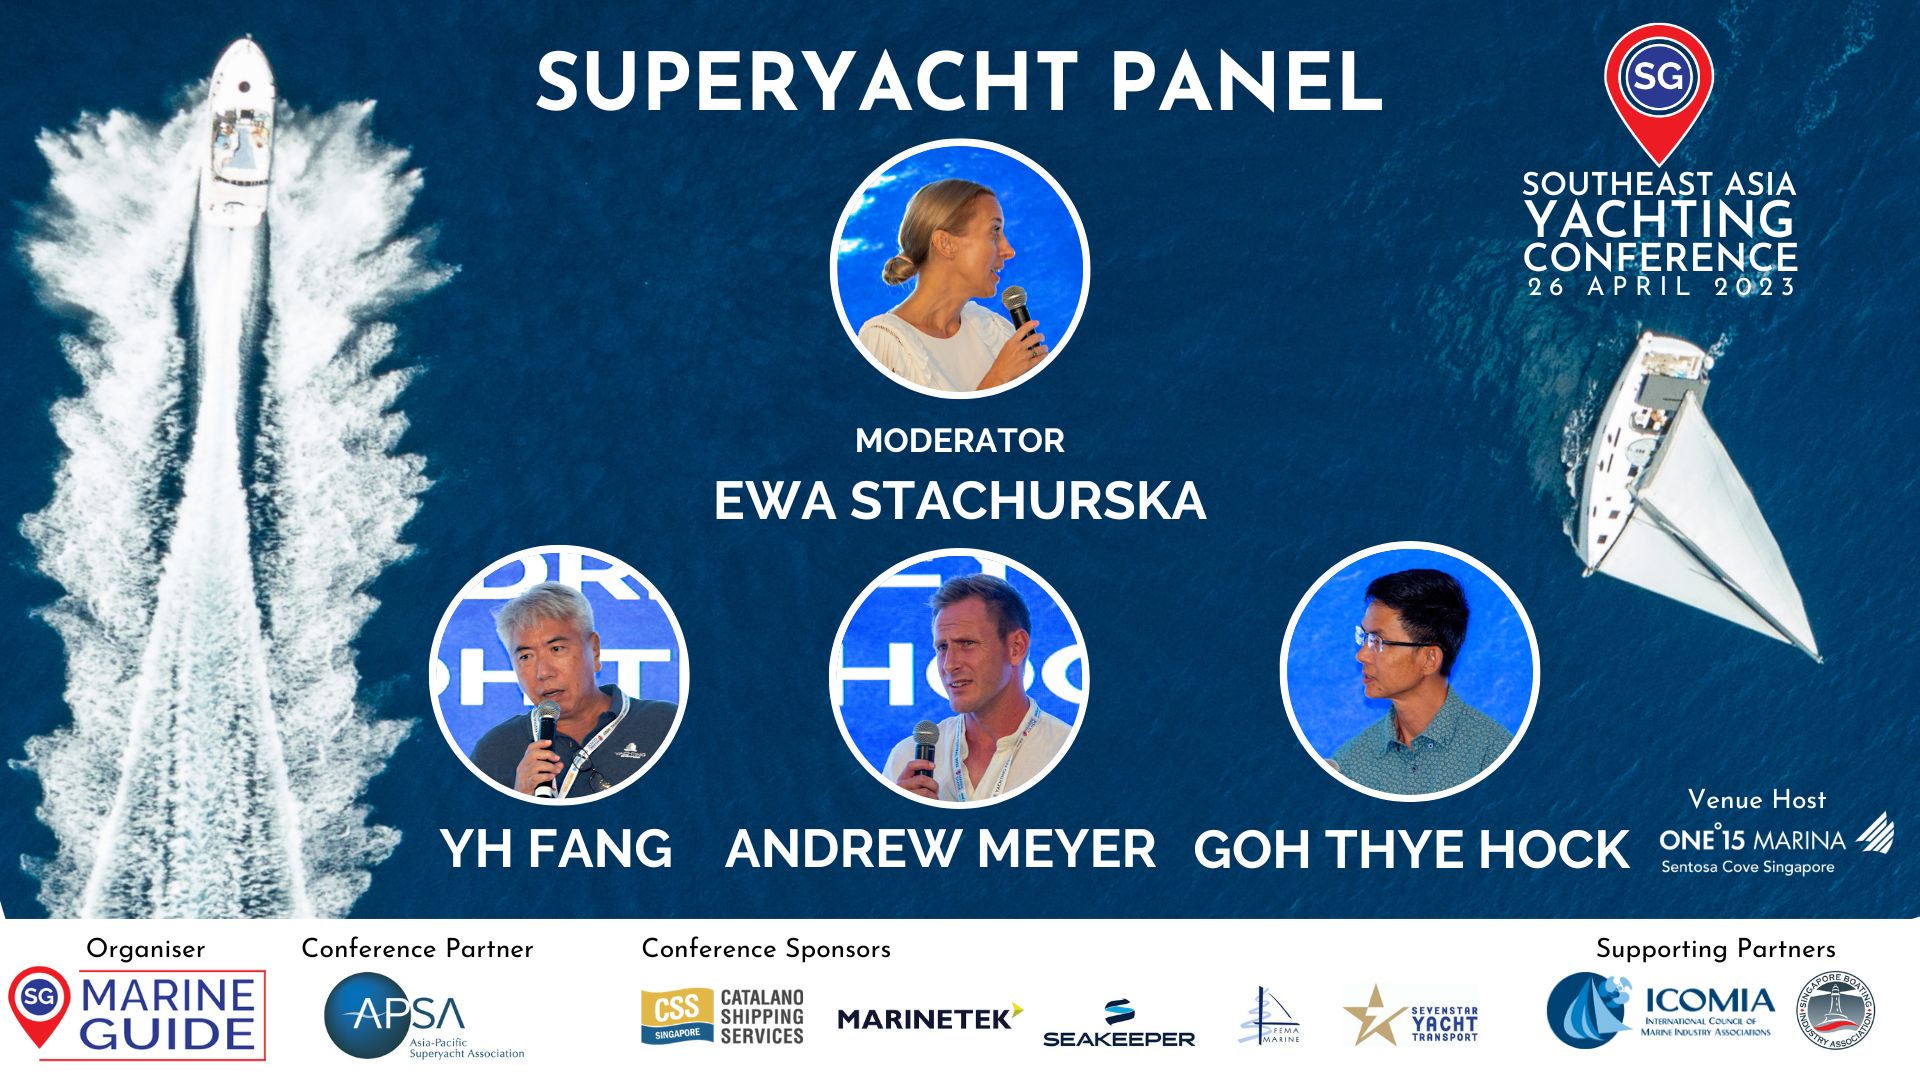 Southeast Asia Yachting Conference Superyacht panel